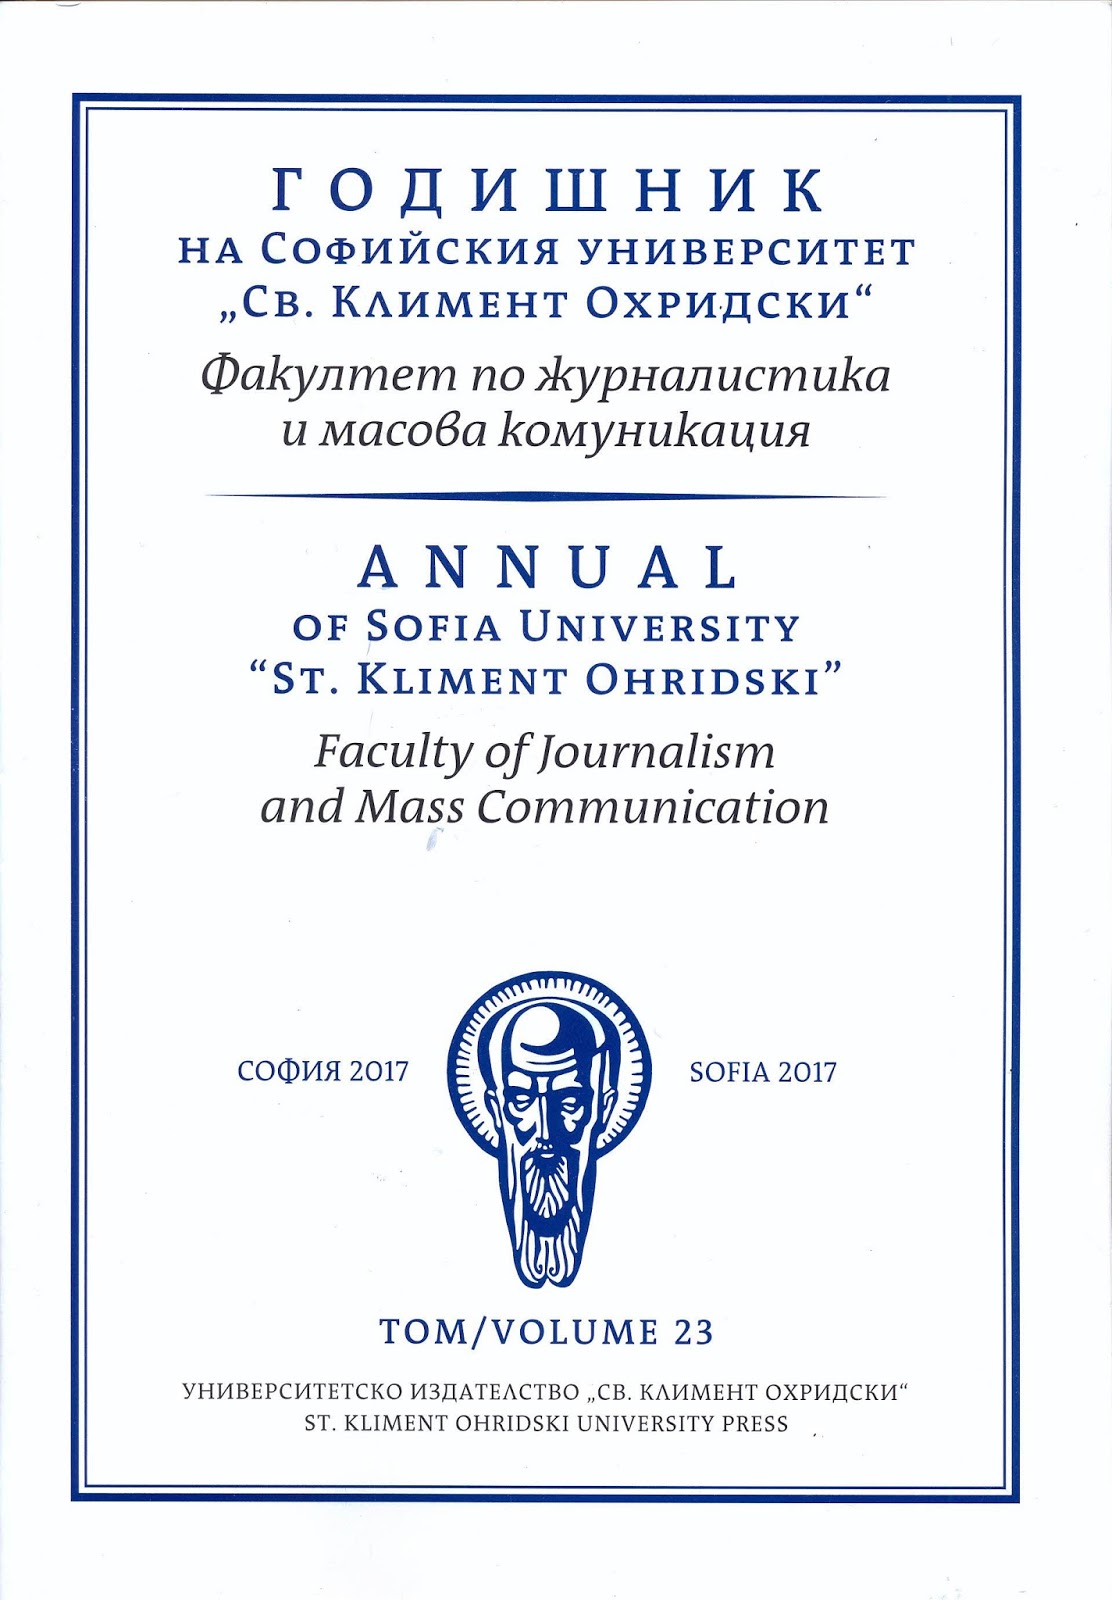 Annual of Sofia University „St. Kliment Ohridski”, Faculty of Journalism and Mass Communication Cover Image